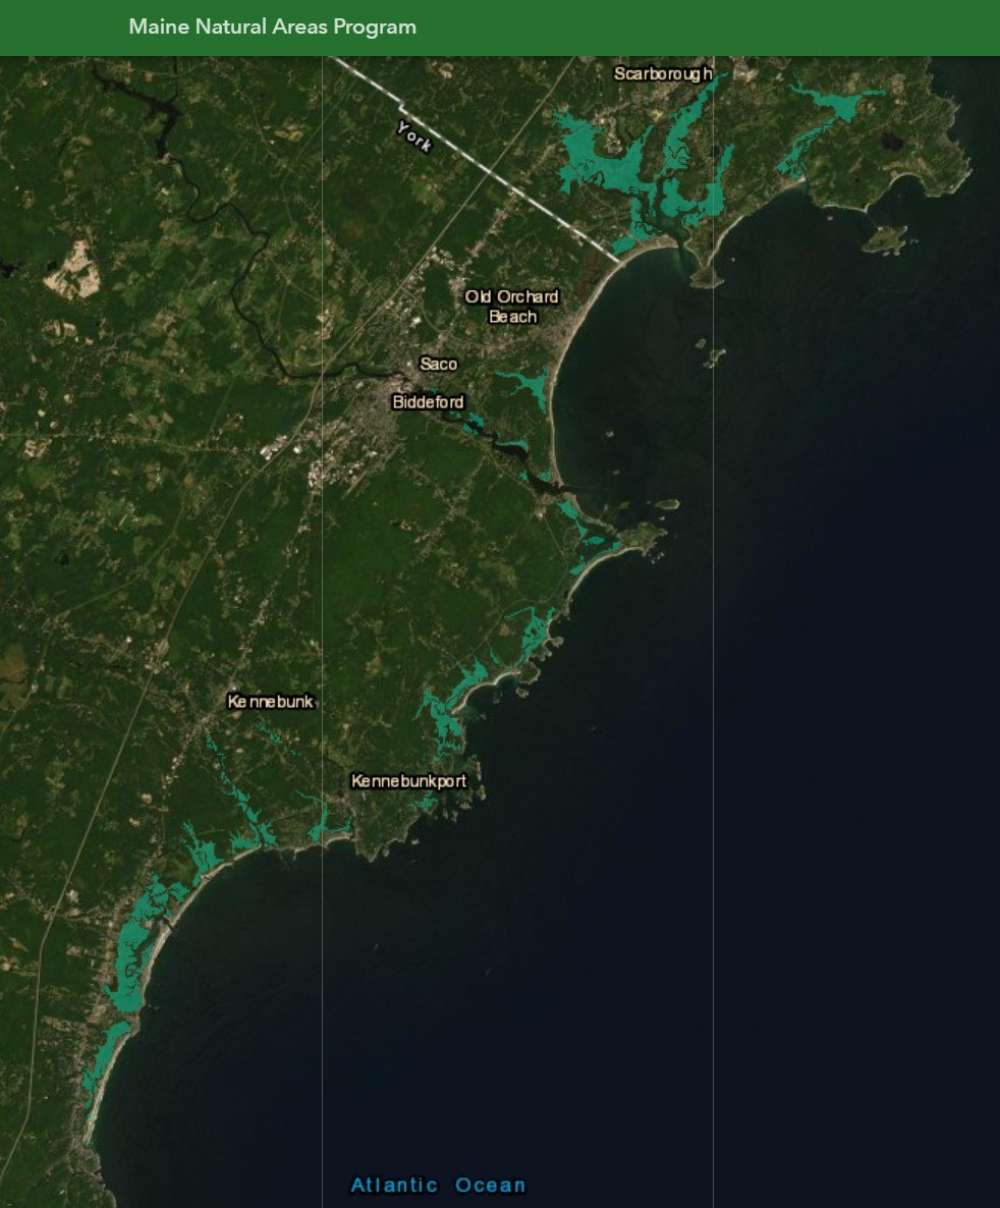 Screenshot from the Maine Natural Areas Program salt marsh map viewer showing Wells to Cape Elizabeth. Click to visit the viewer.